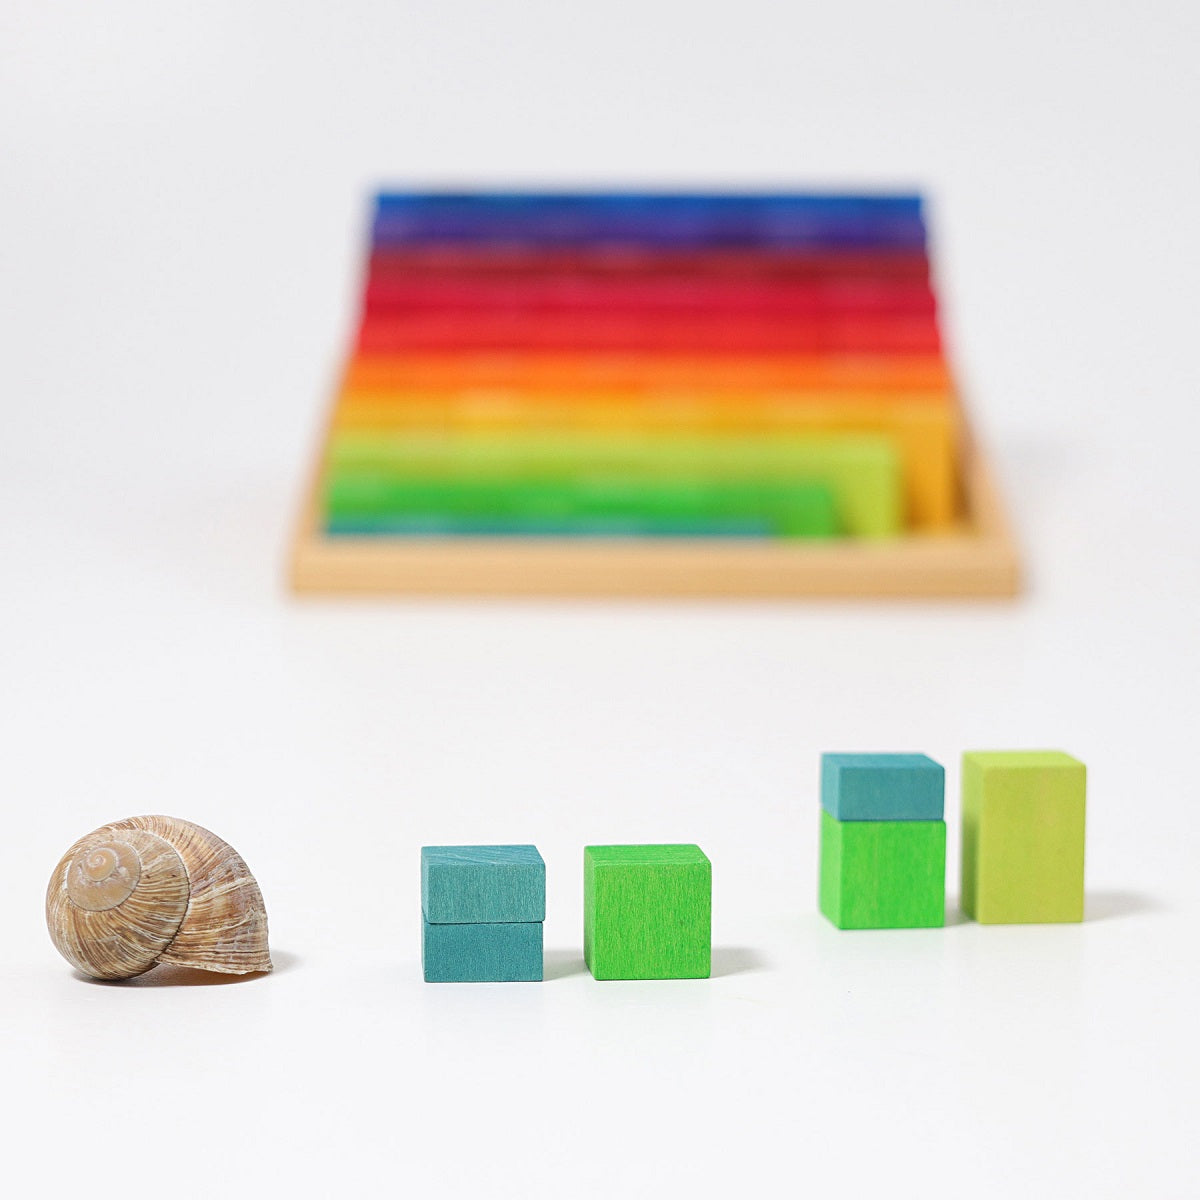 Grimm's Learning - Stepped Counting Blocks, 2cm thick 2 x 2 cm Building Sets